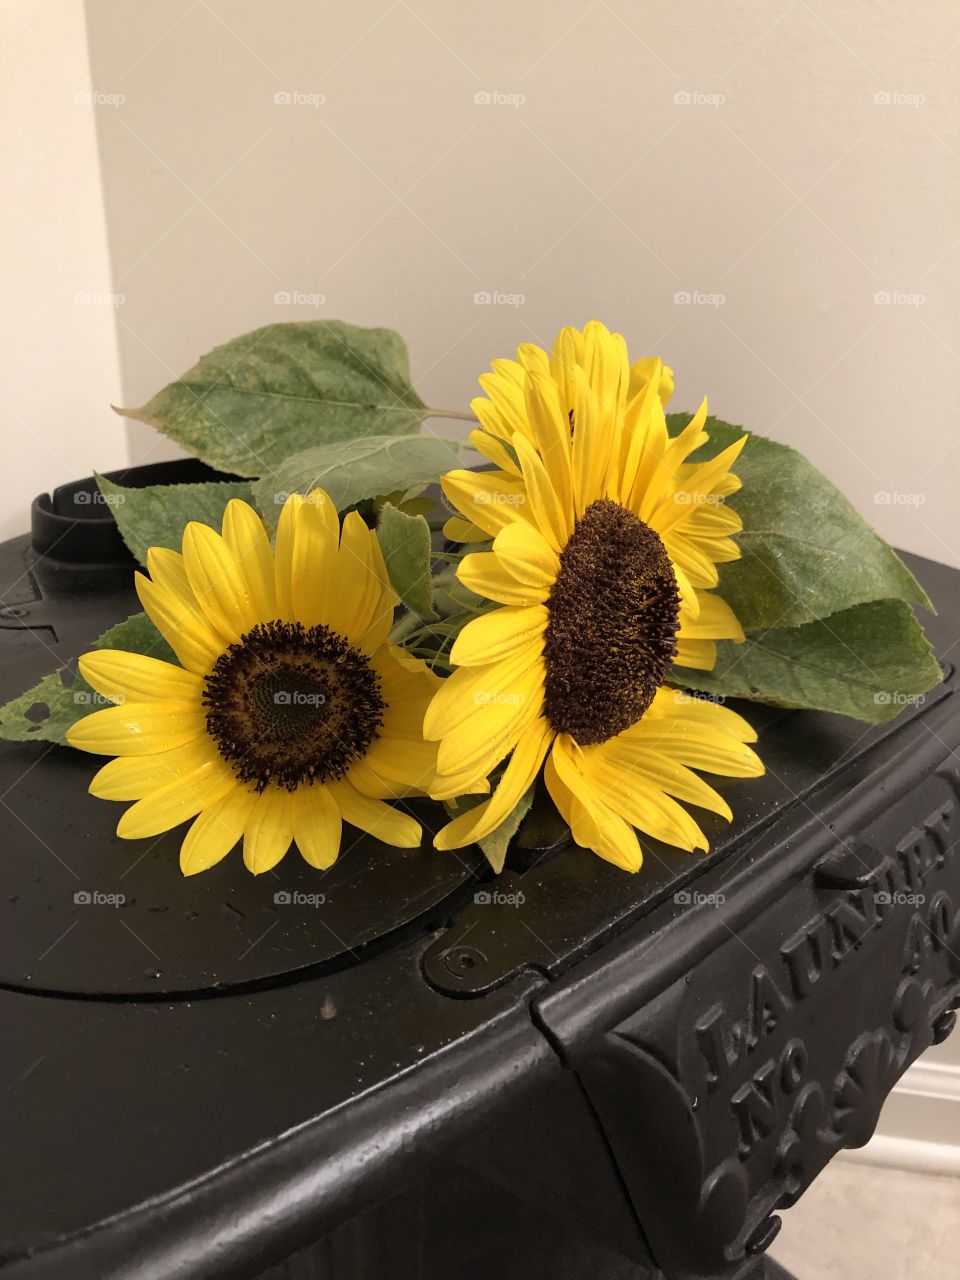 Cast iron stove and sunflowers 